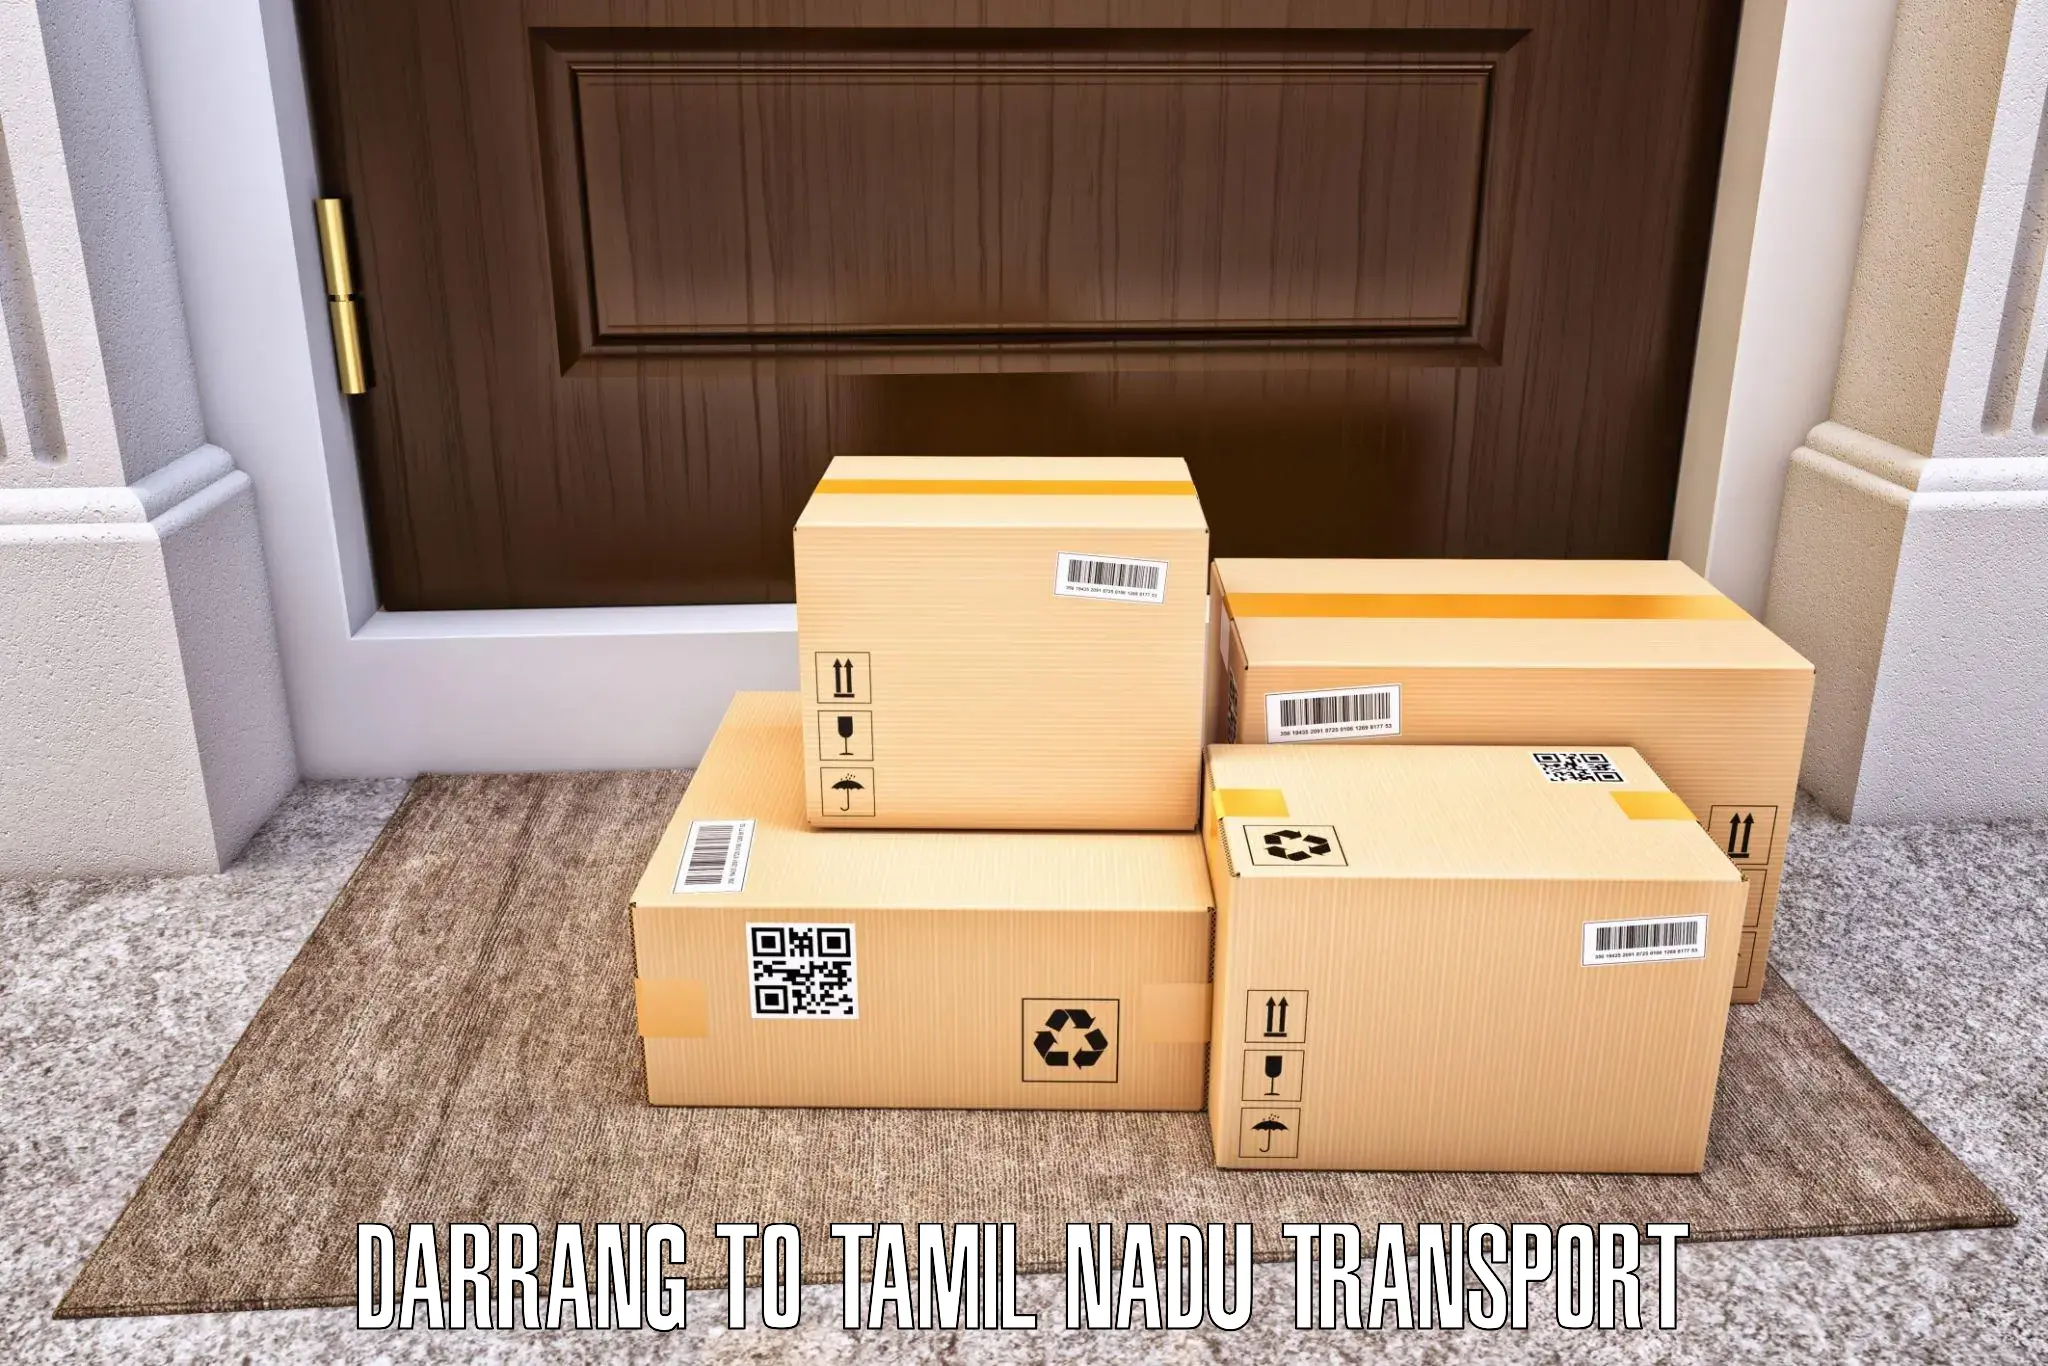 Delivery service Darrang to Palayankottai